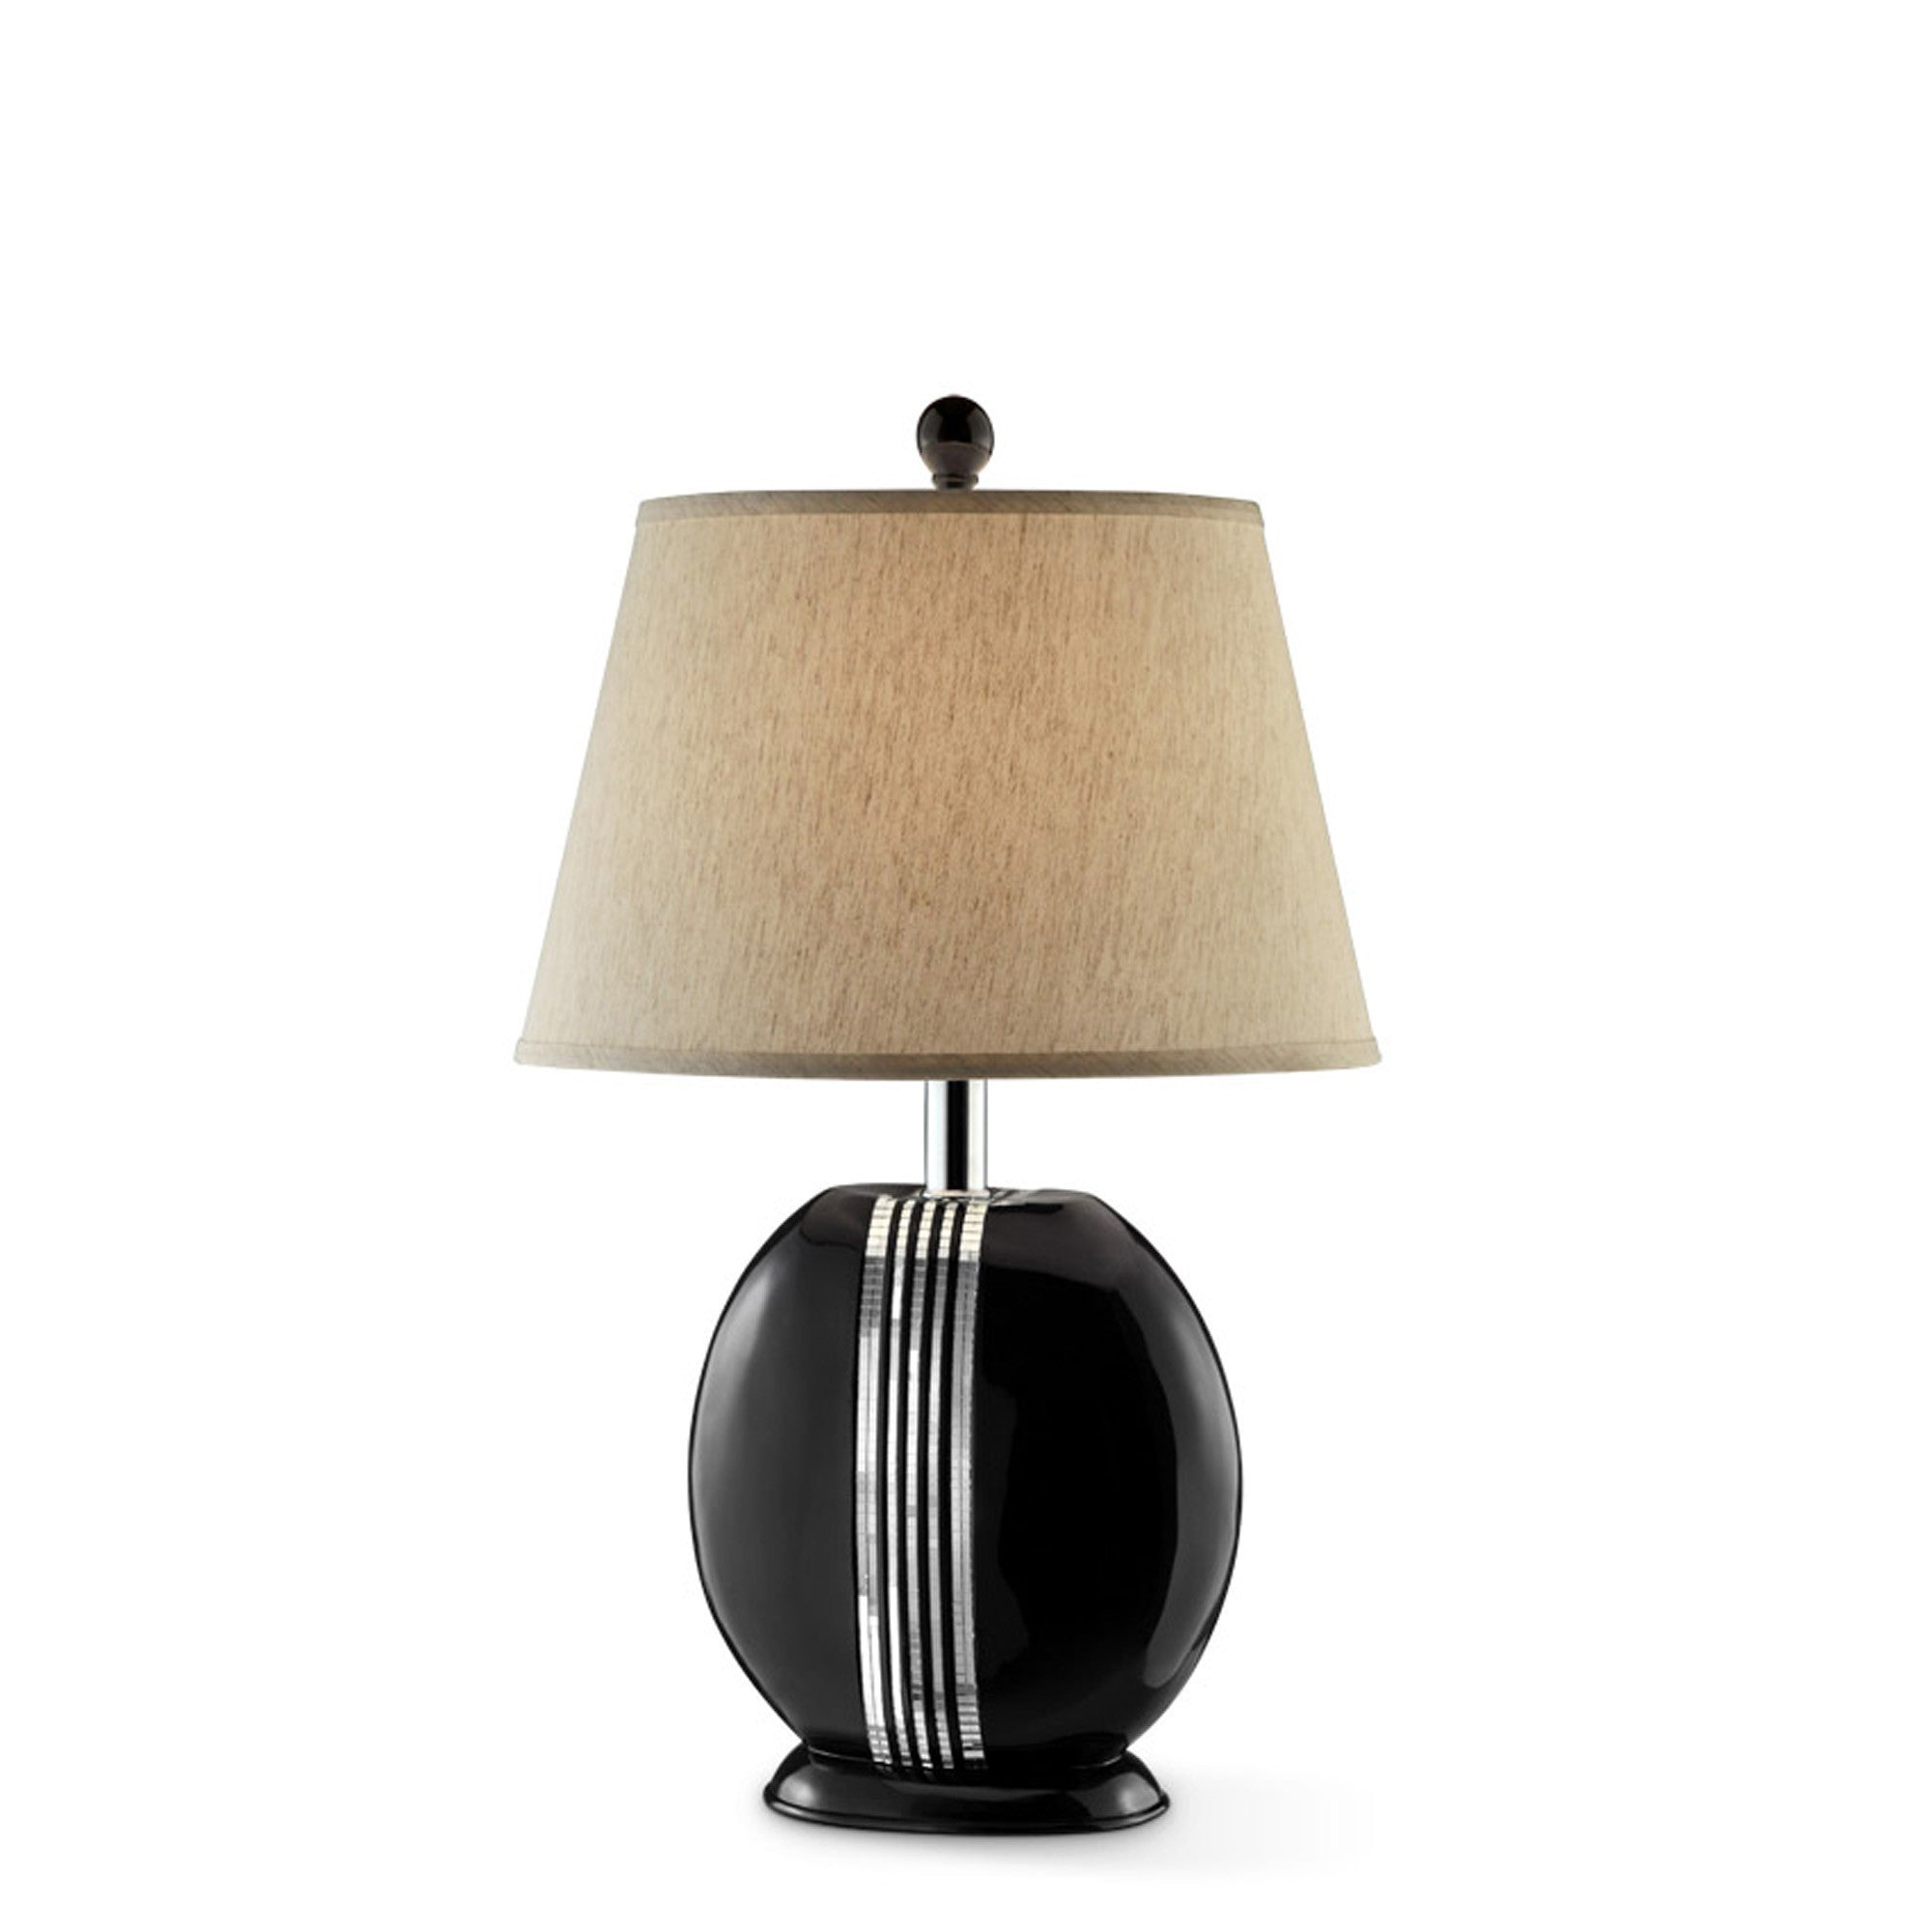 Black Polyresin Lamp with Beige Fabric Shade